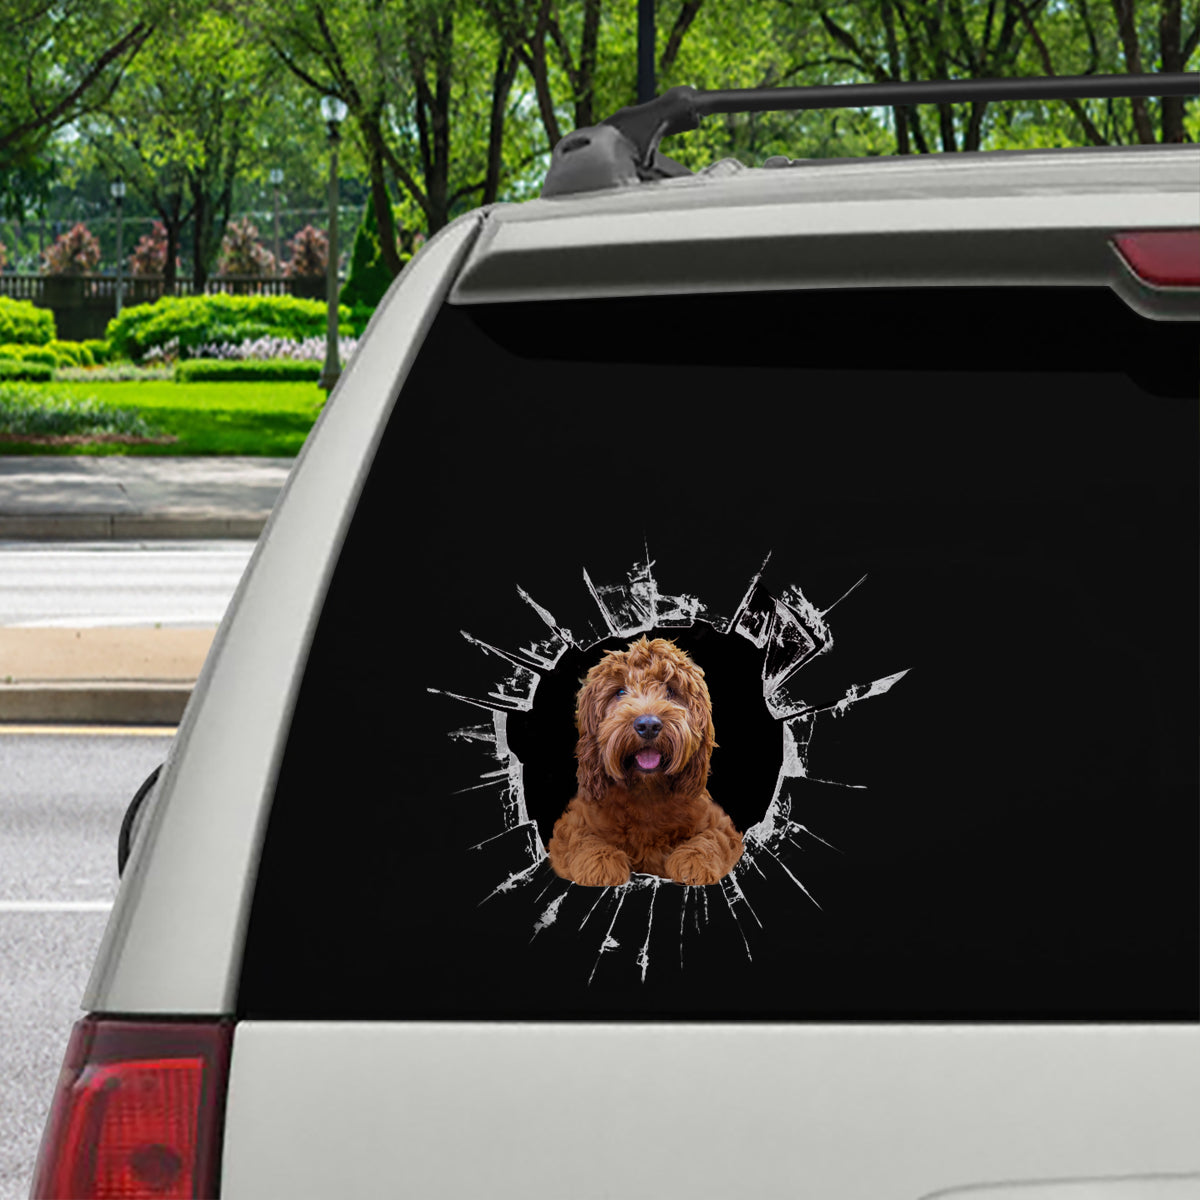 Get In - It's Time For Shopping - Cockapoo Car Sticker V1